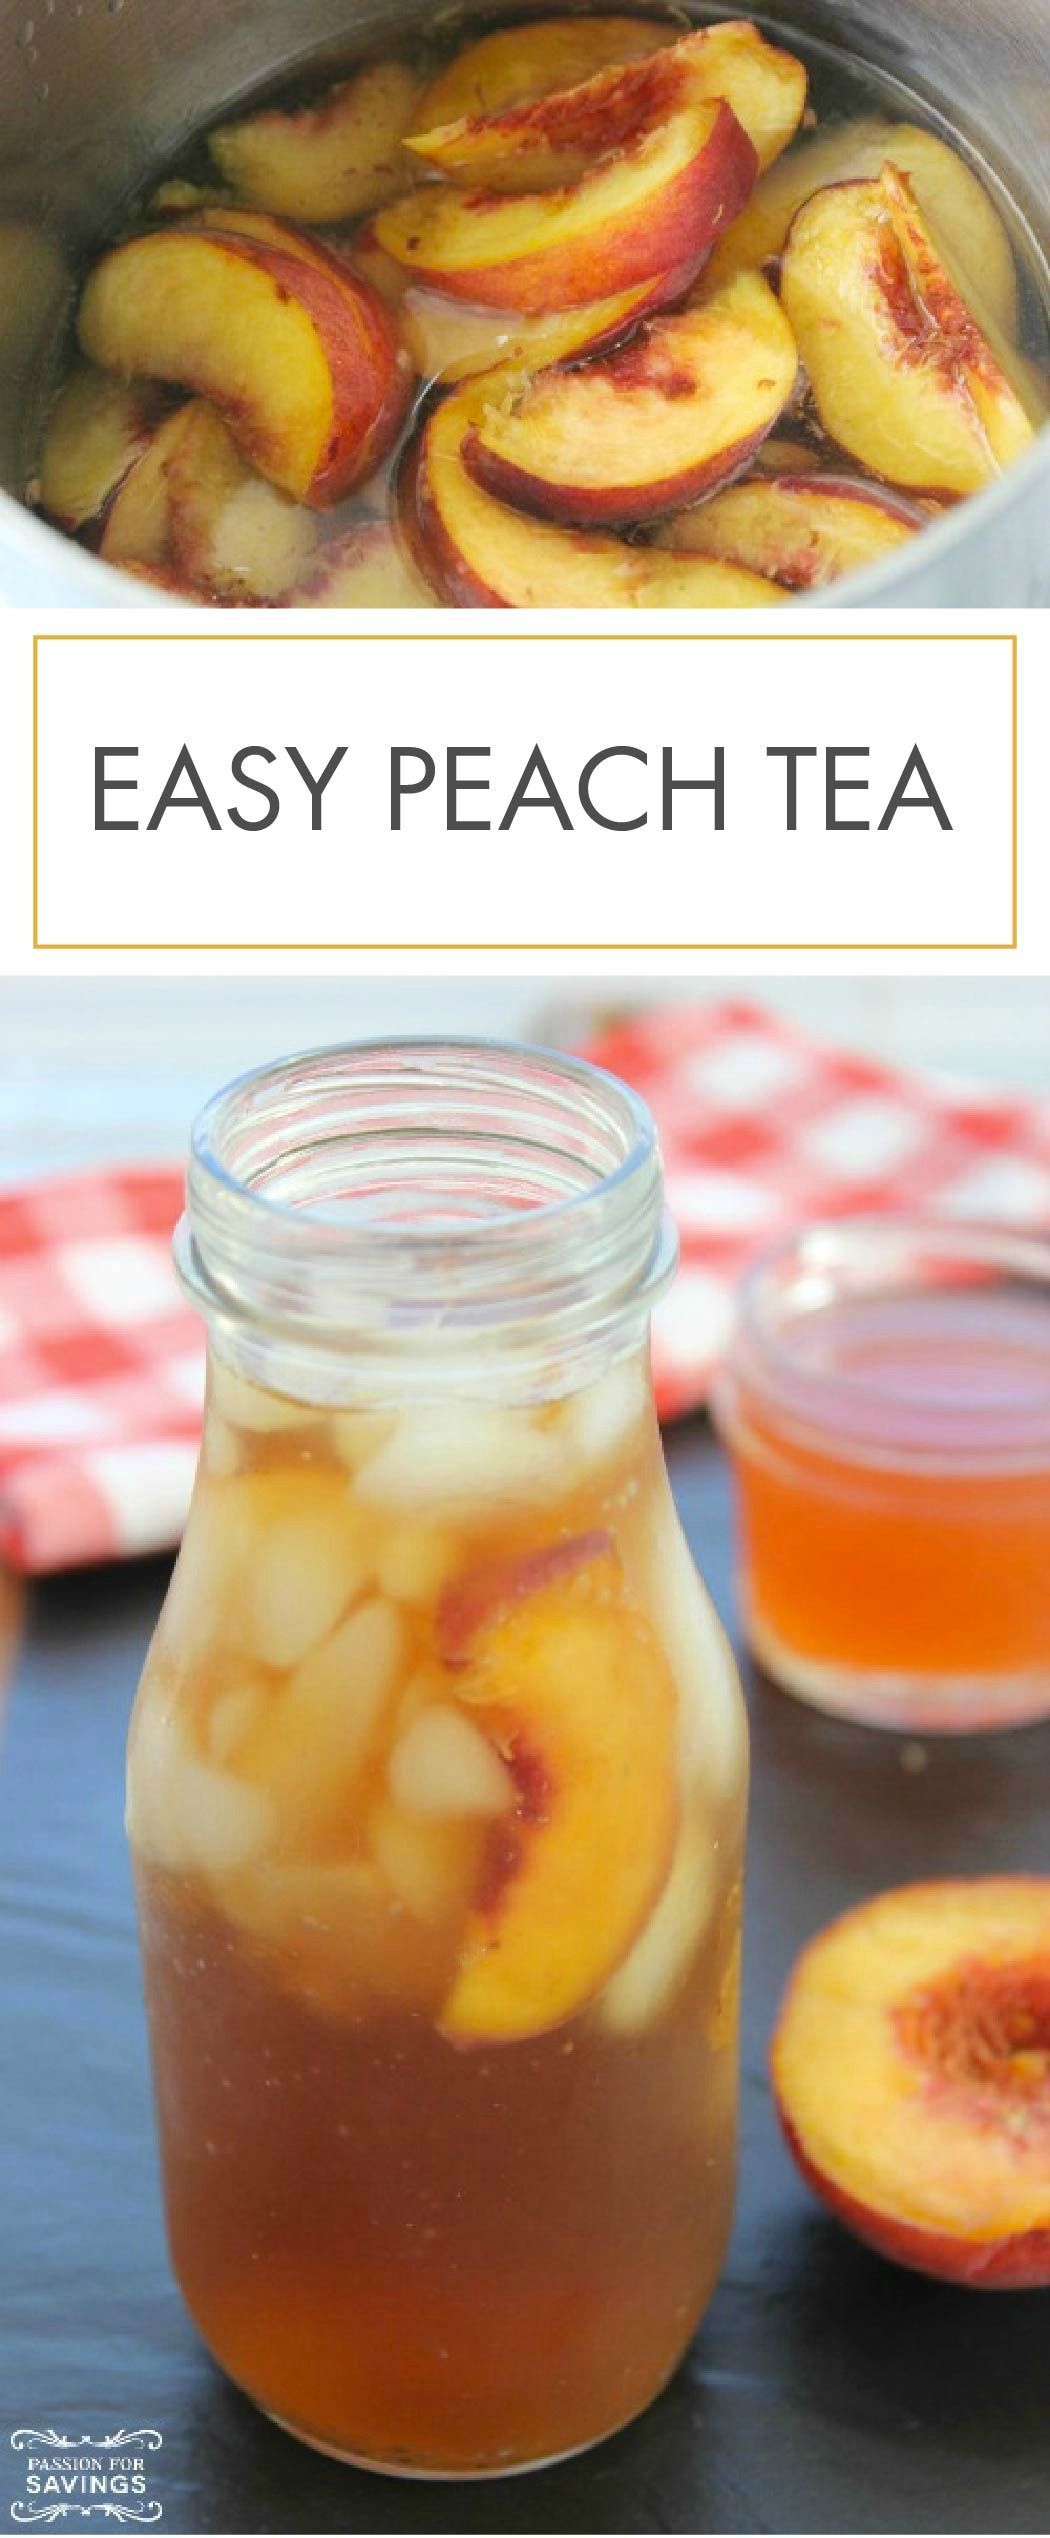 This Easy Peach Tea is the perfect drink recipe for grilling out on sunny days with friends! It’s so refreshing, and you will